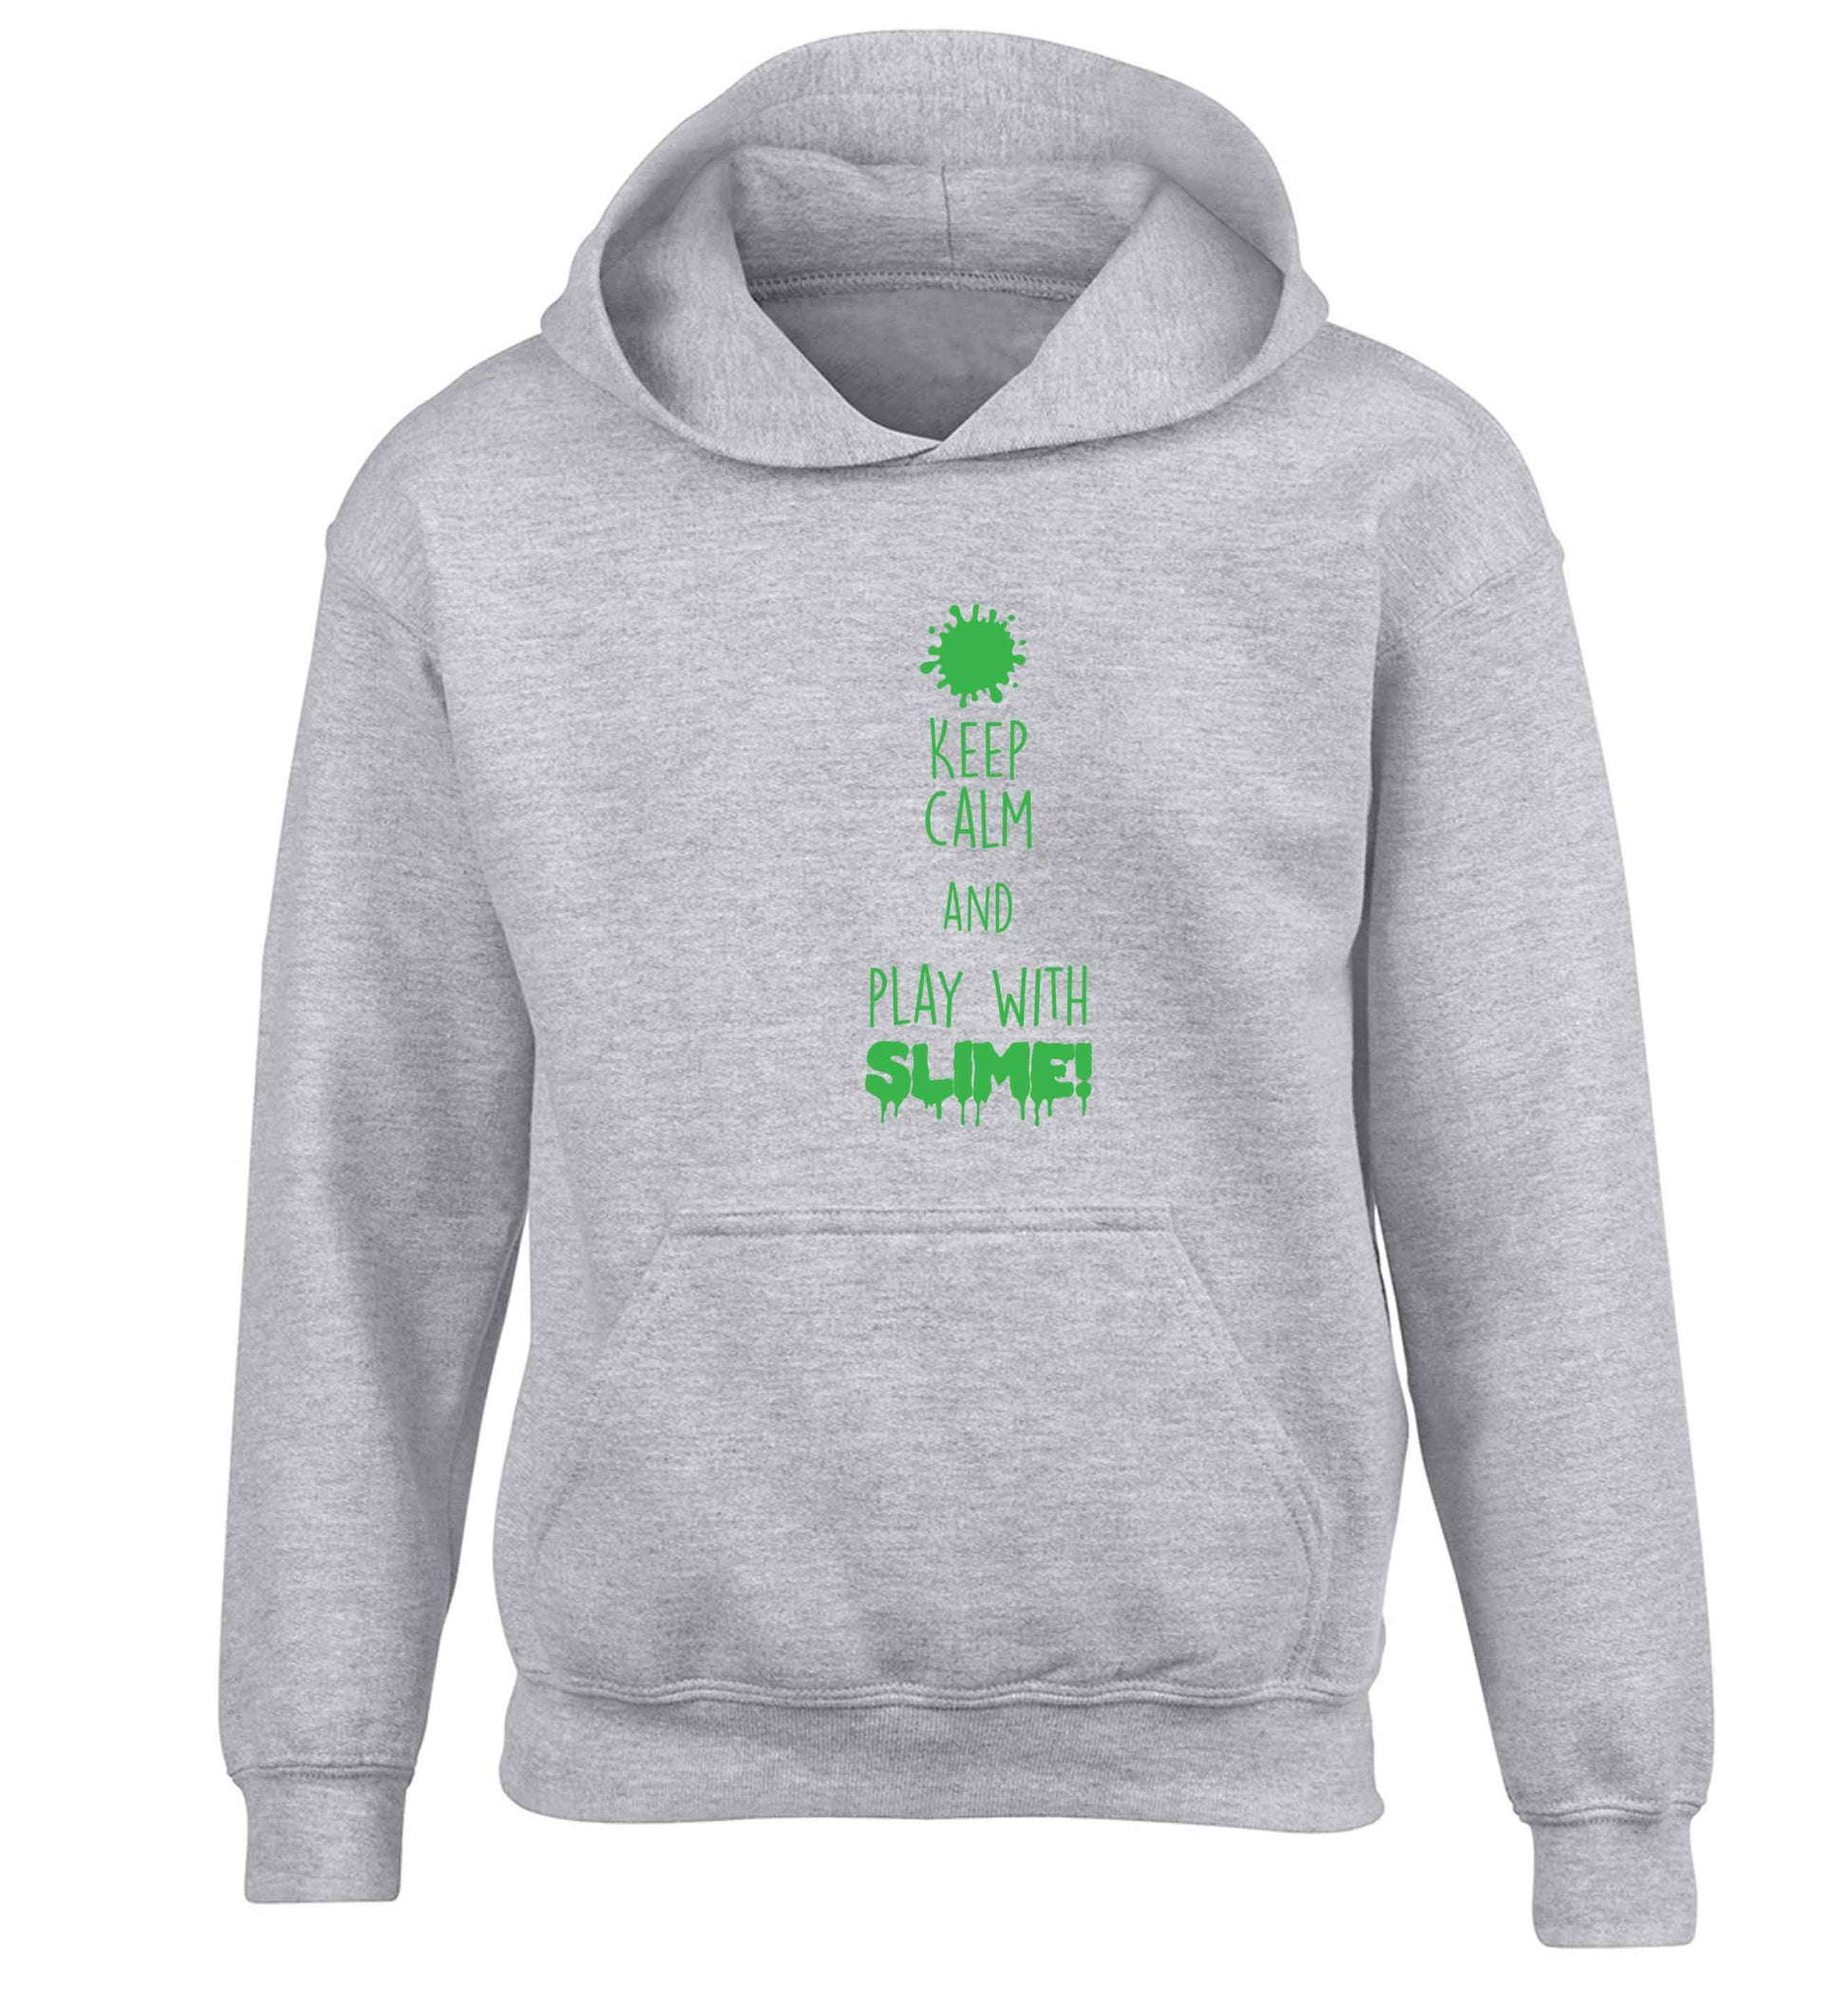 Neon green keep calm and play with slime!children's grey hoodie 12-13 Years